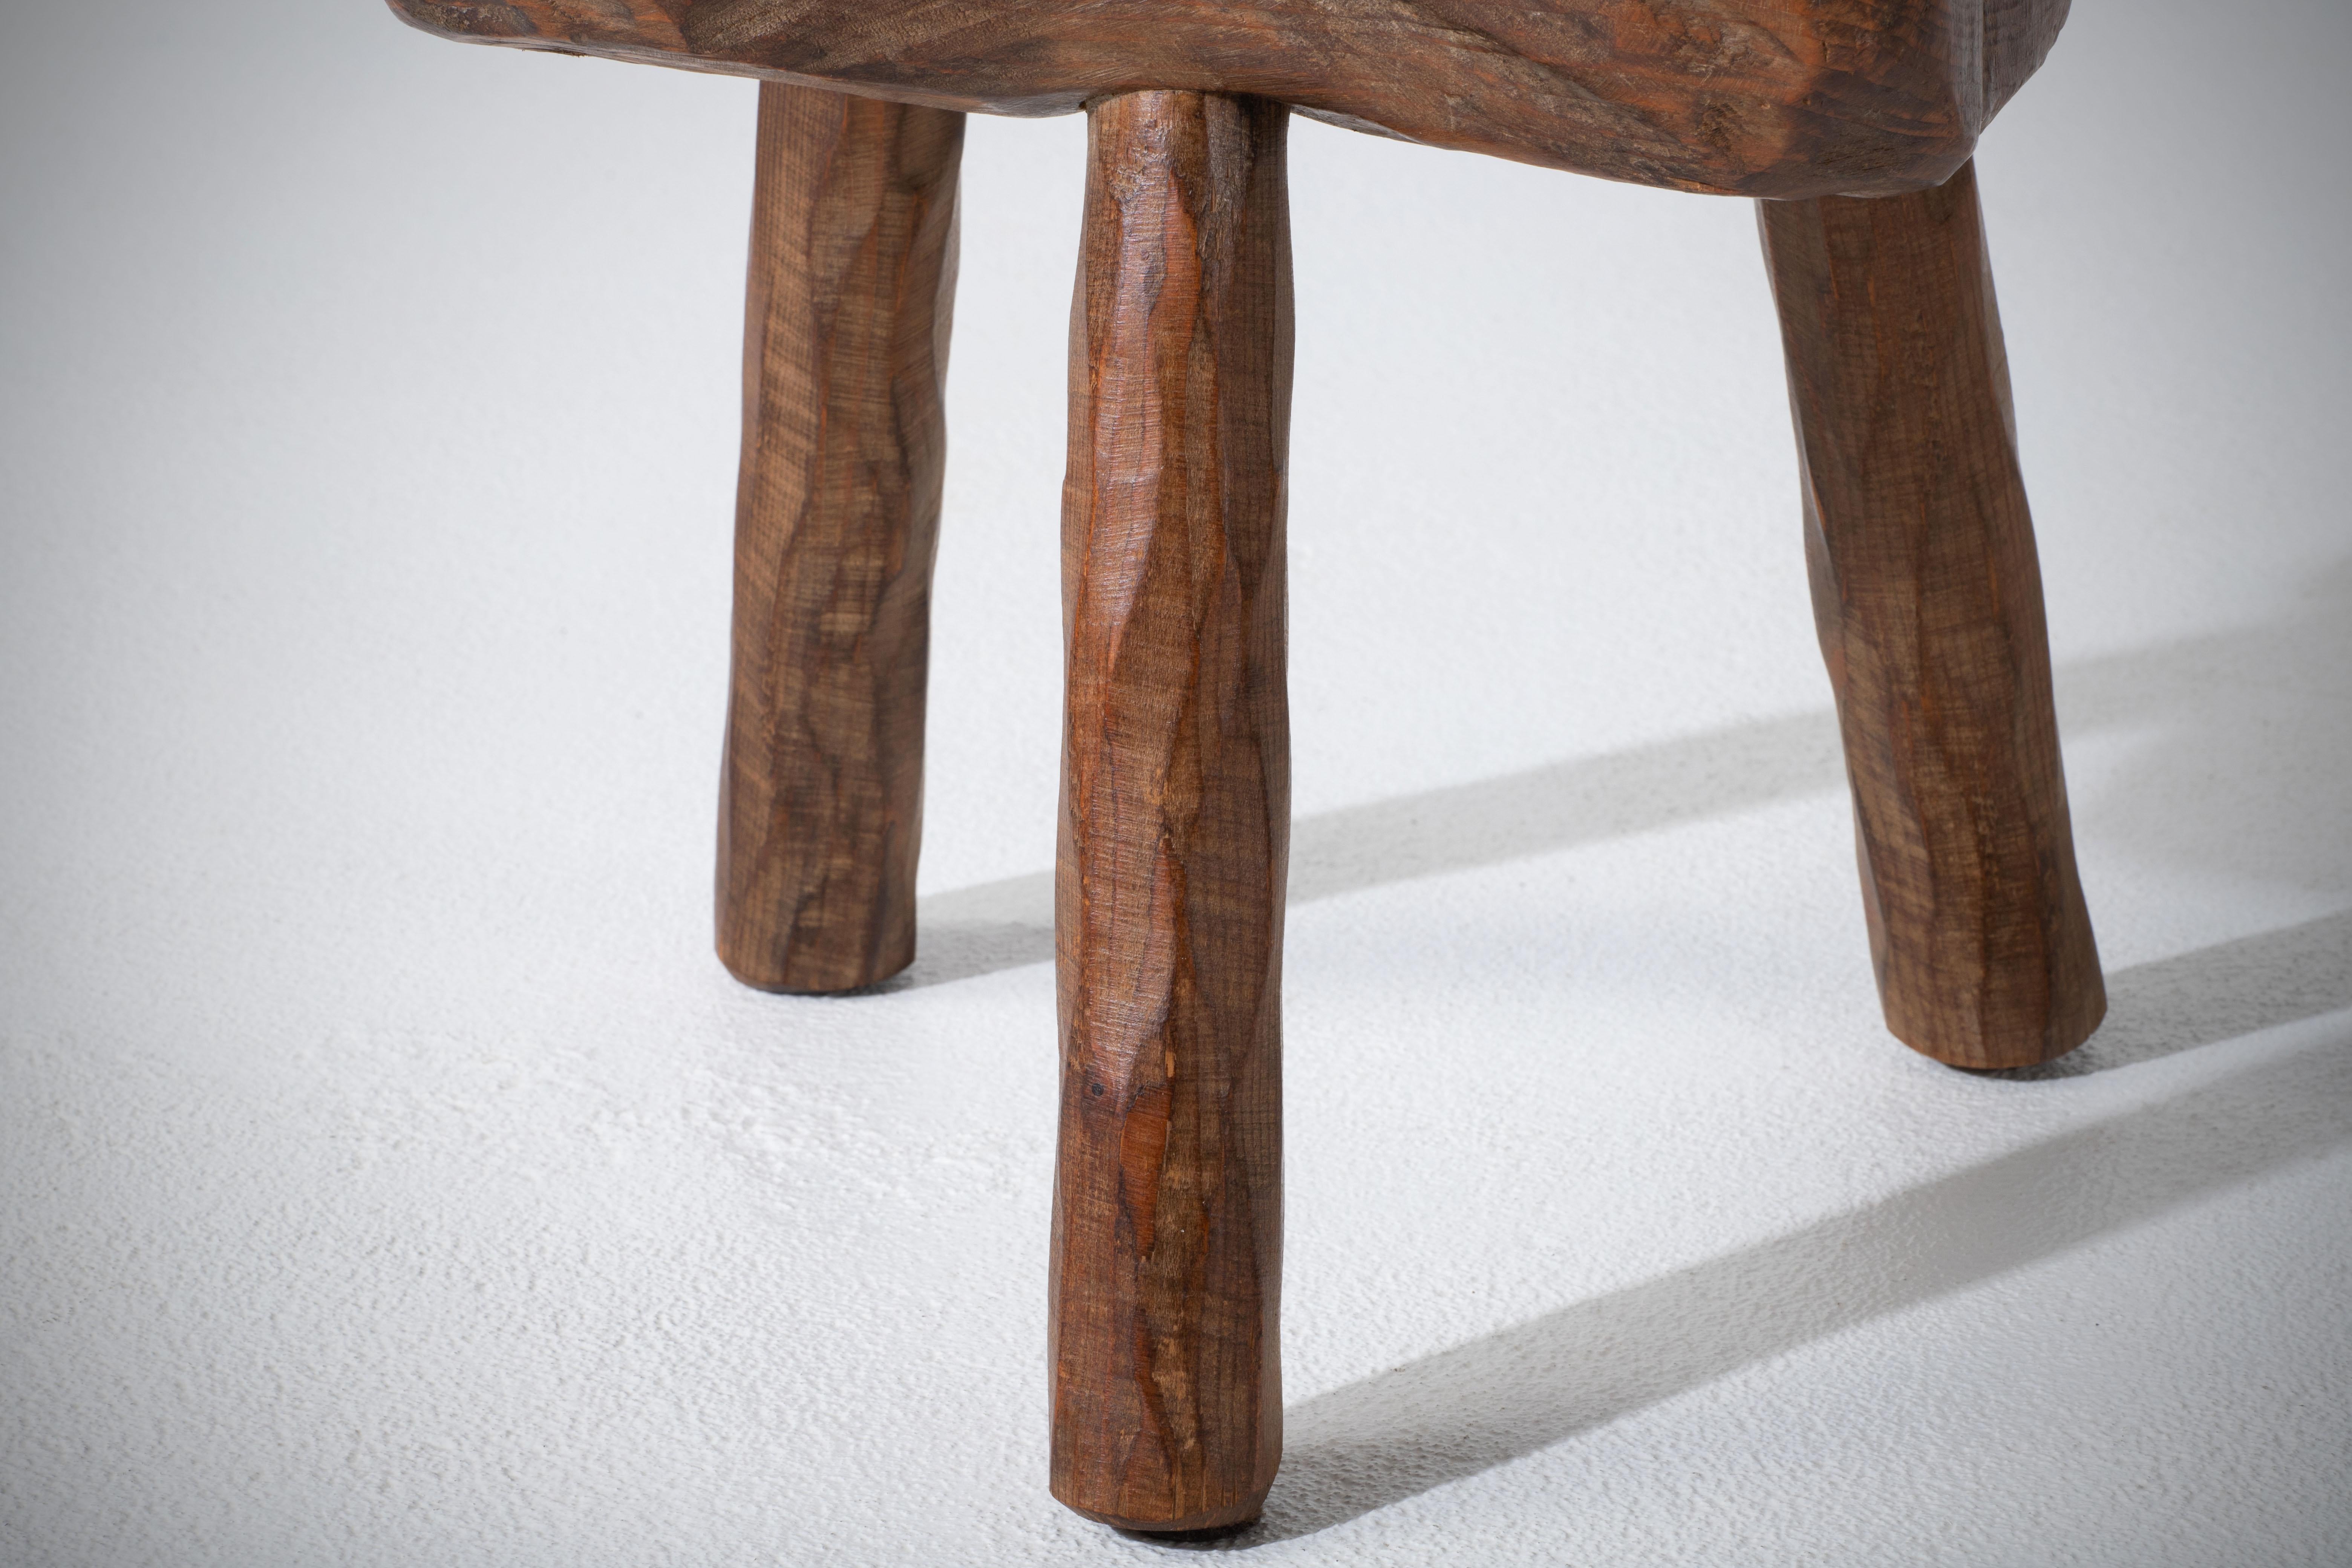 Fantastic wood stool from France in a rustic style. Olivetree, beautiful patina. It was made in the 1960s.